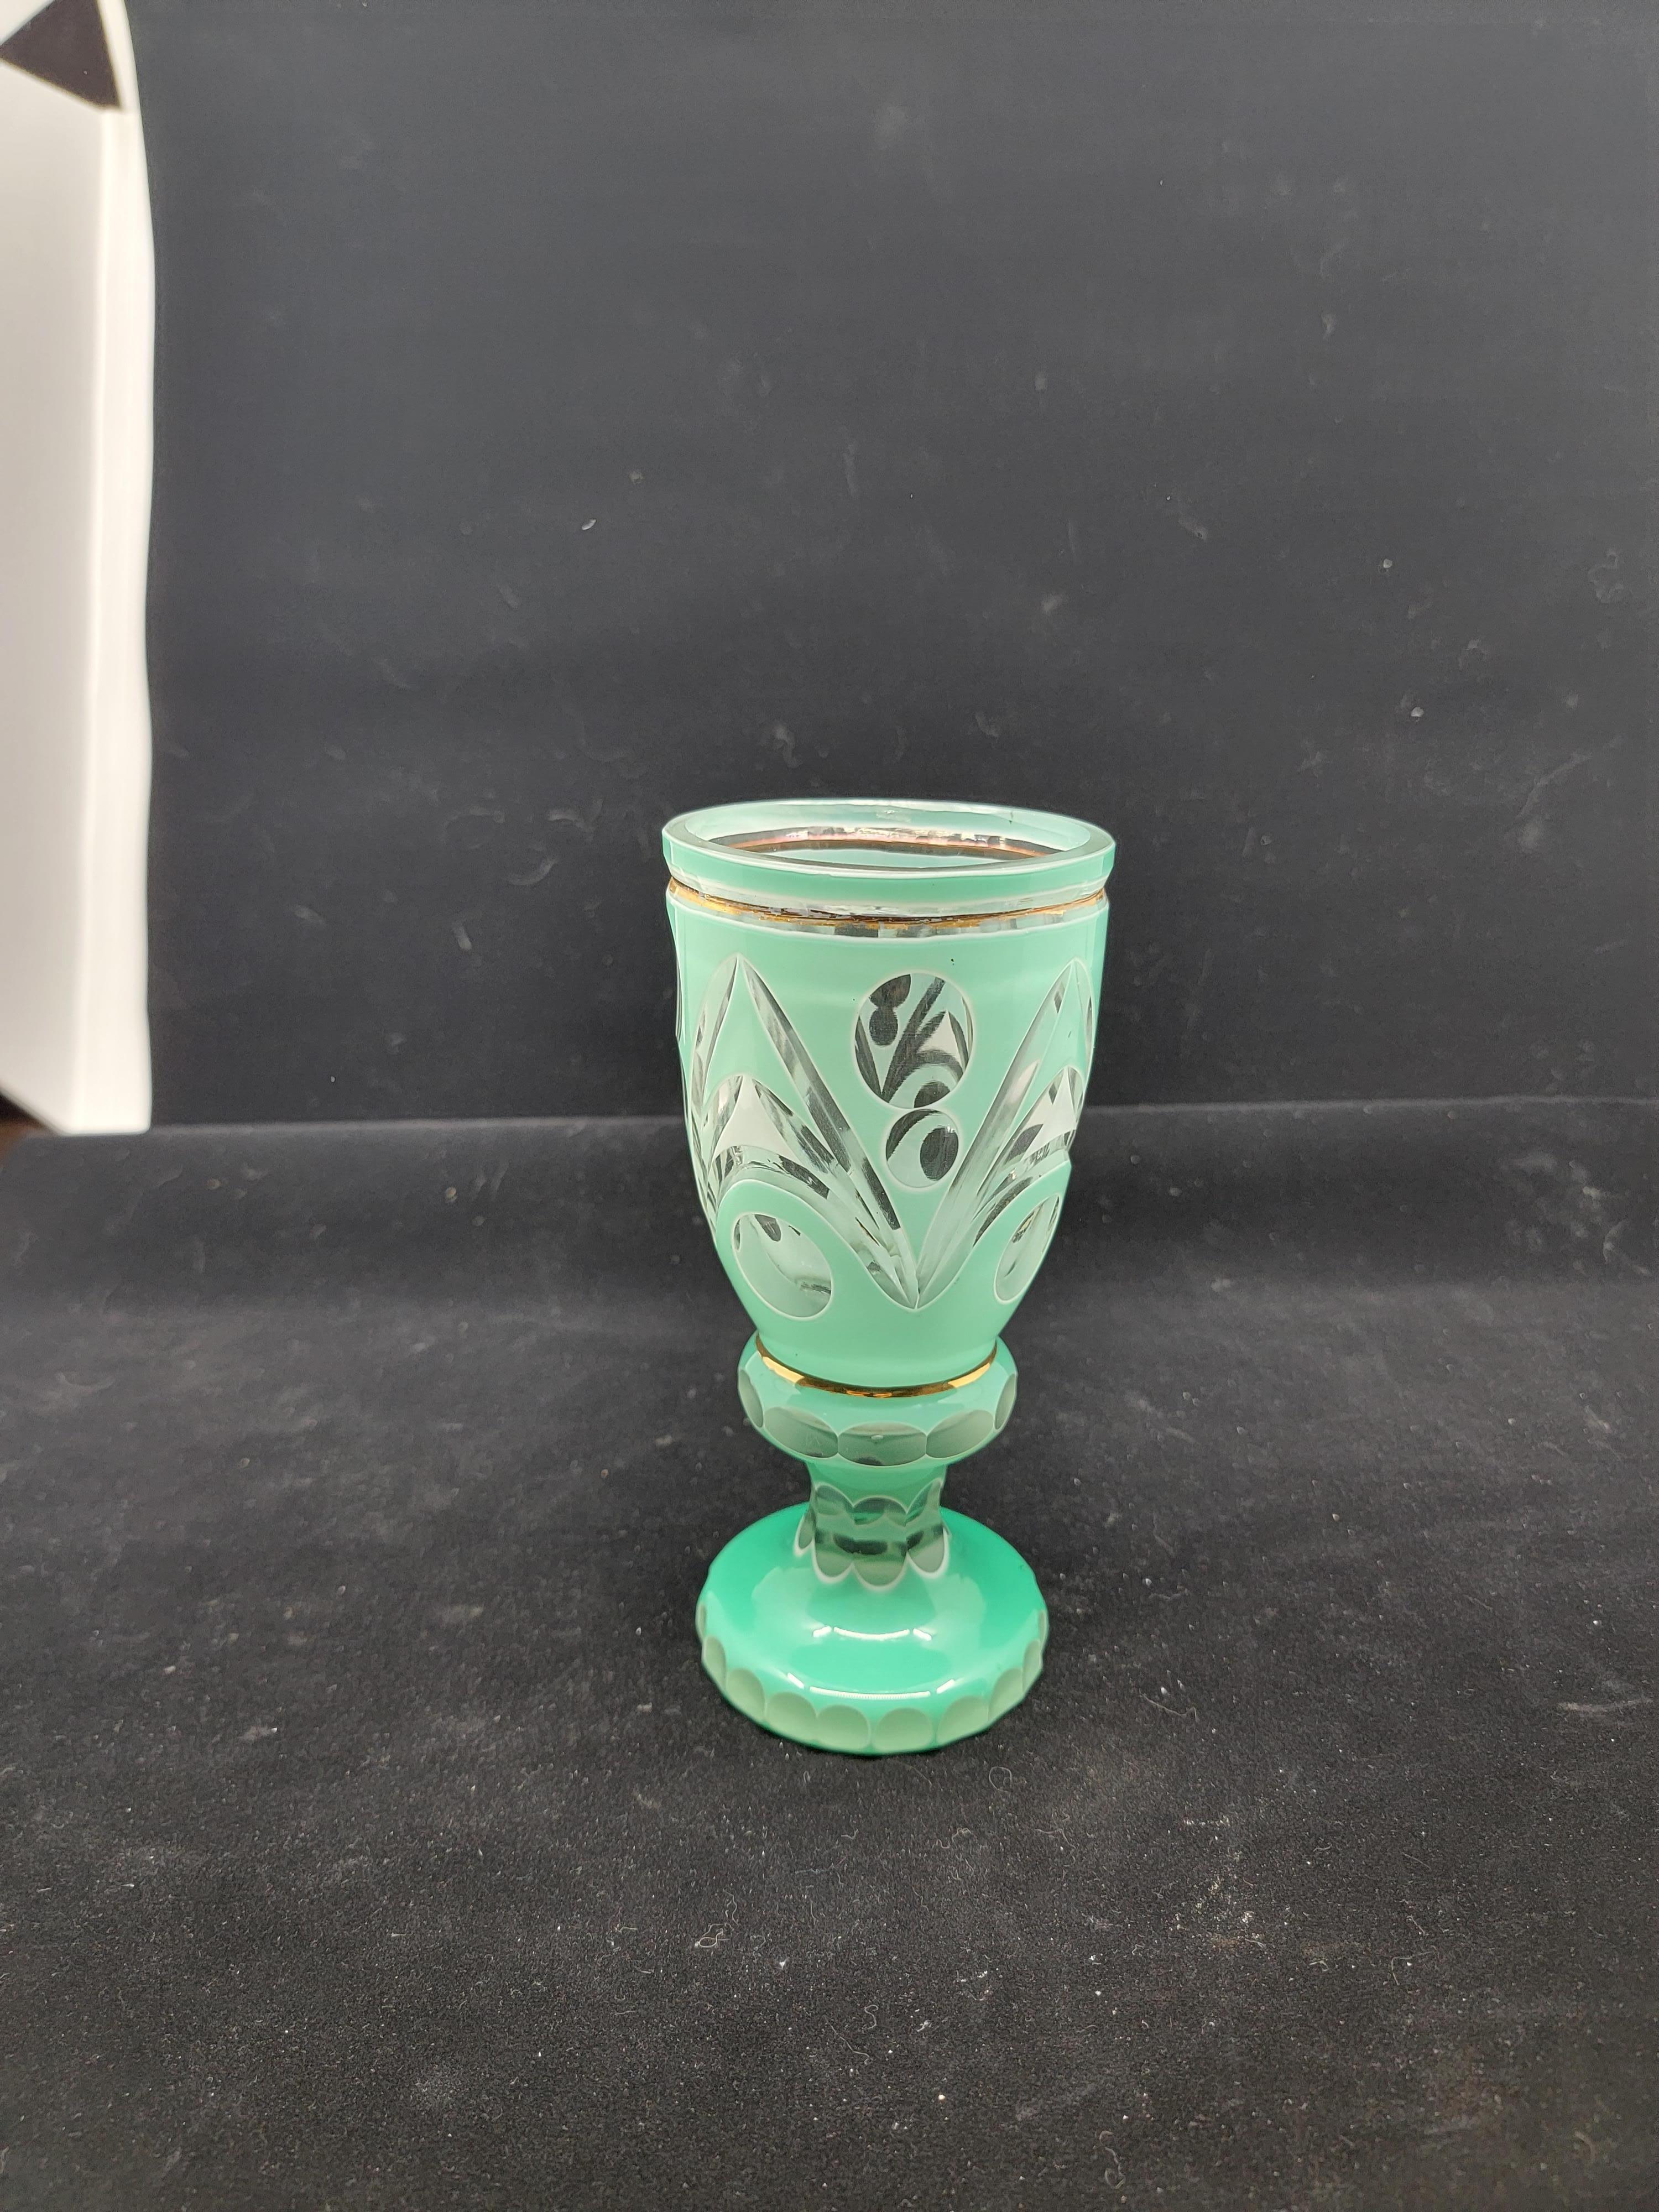 This pattern is similar to the pattern of the ruby bohemian goblet offered on our site. The coloring is rare. This pale green is striking and is a perfect compliment to the ruby offering also on our site. Look at them together. These will act as His